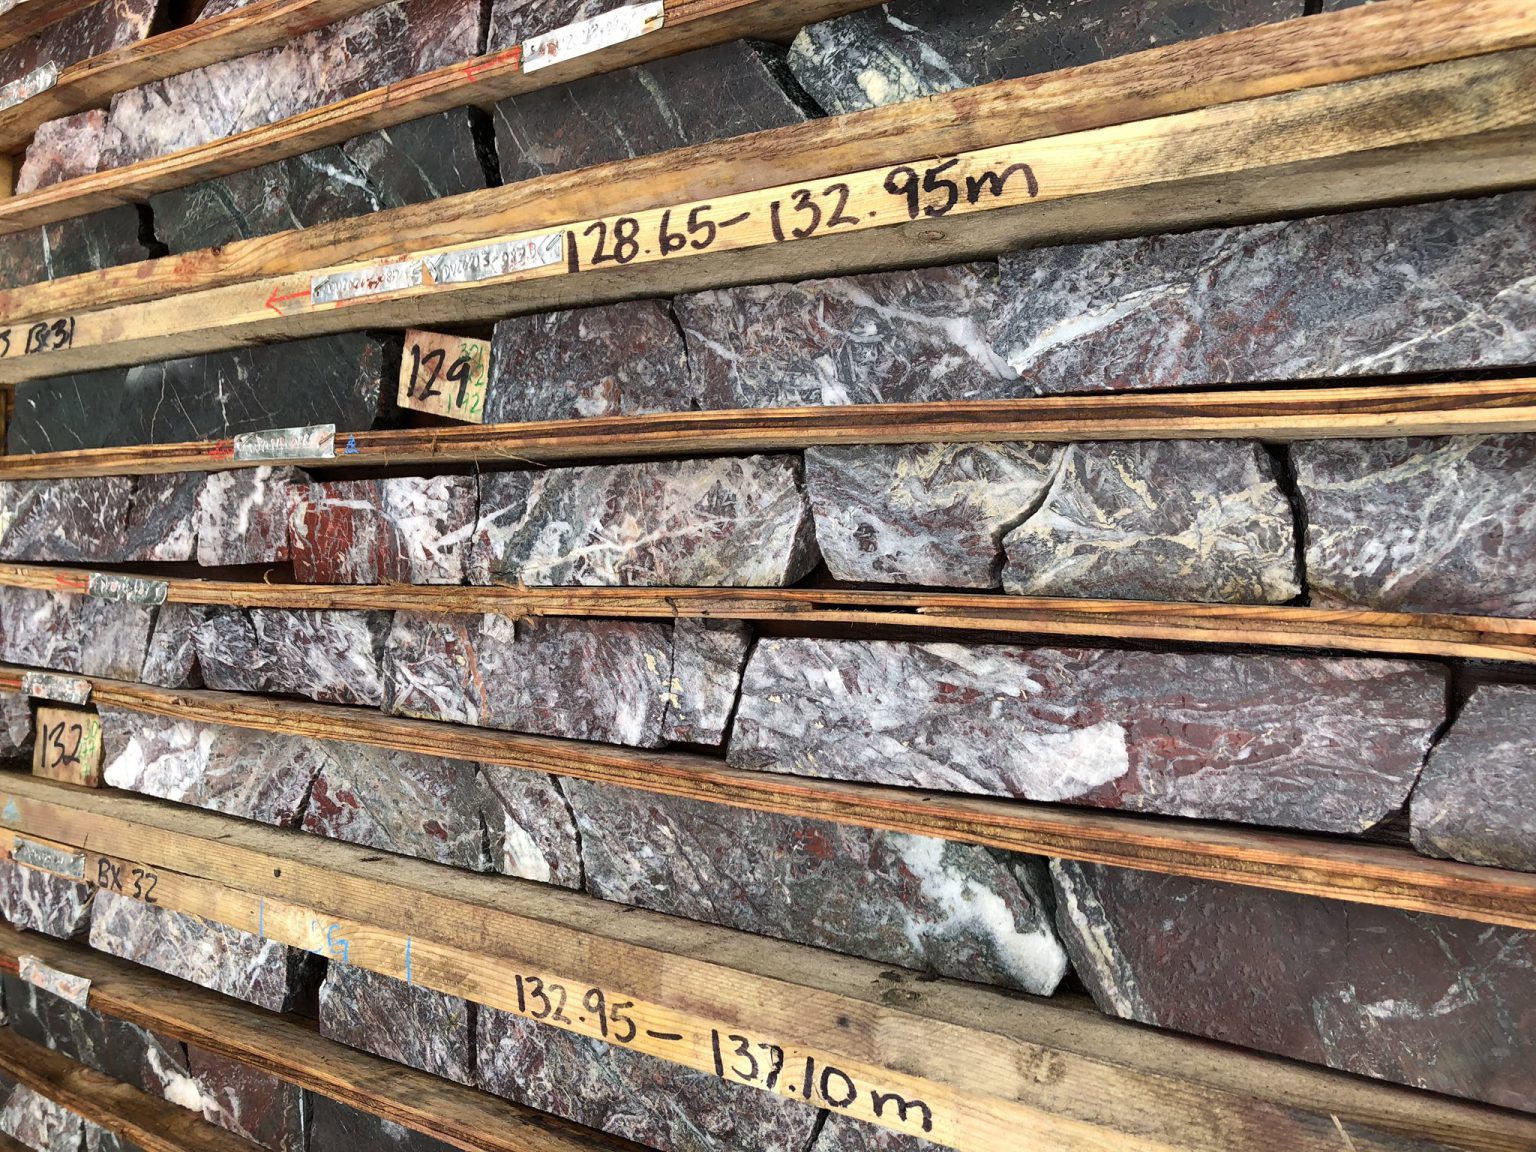 Dolly Varden Silver to acquire Fury Gold Mines’ Homestake Ridge project for $39m